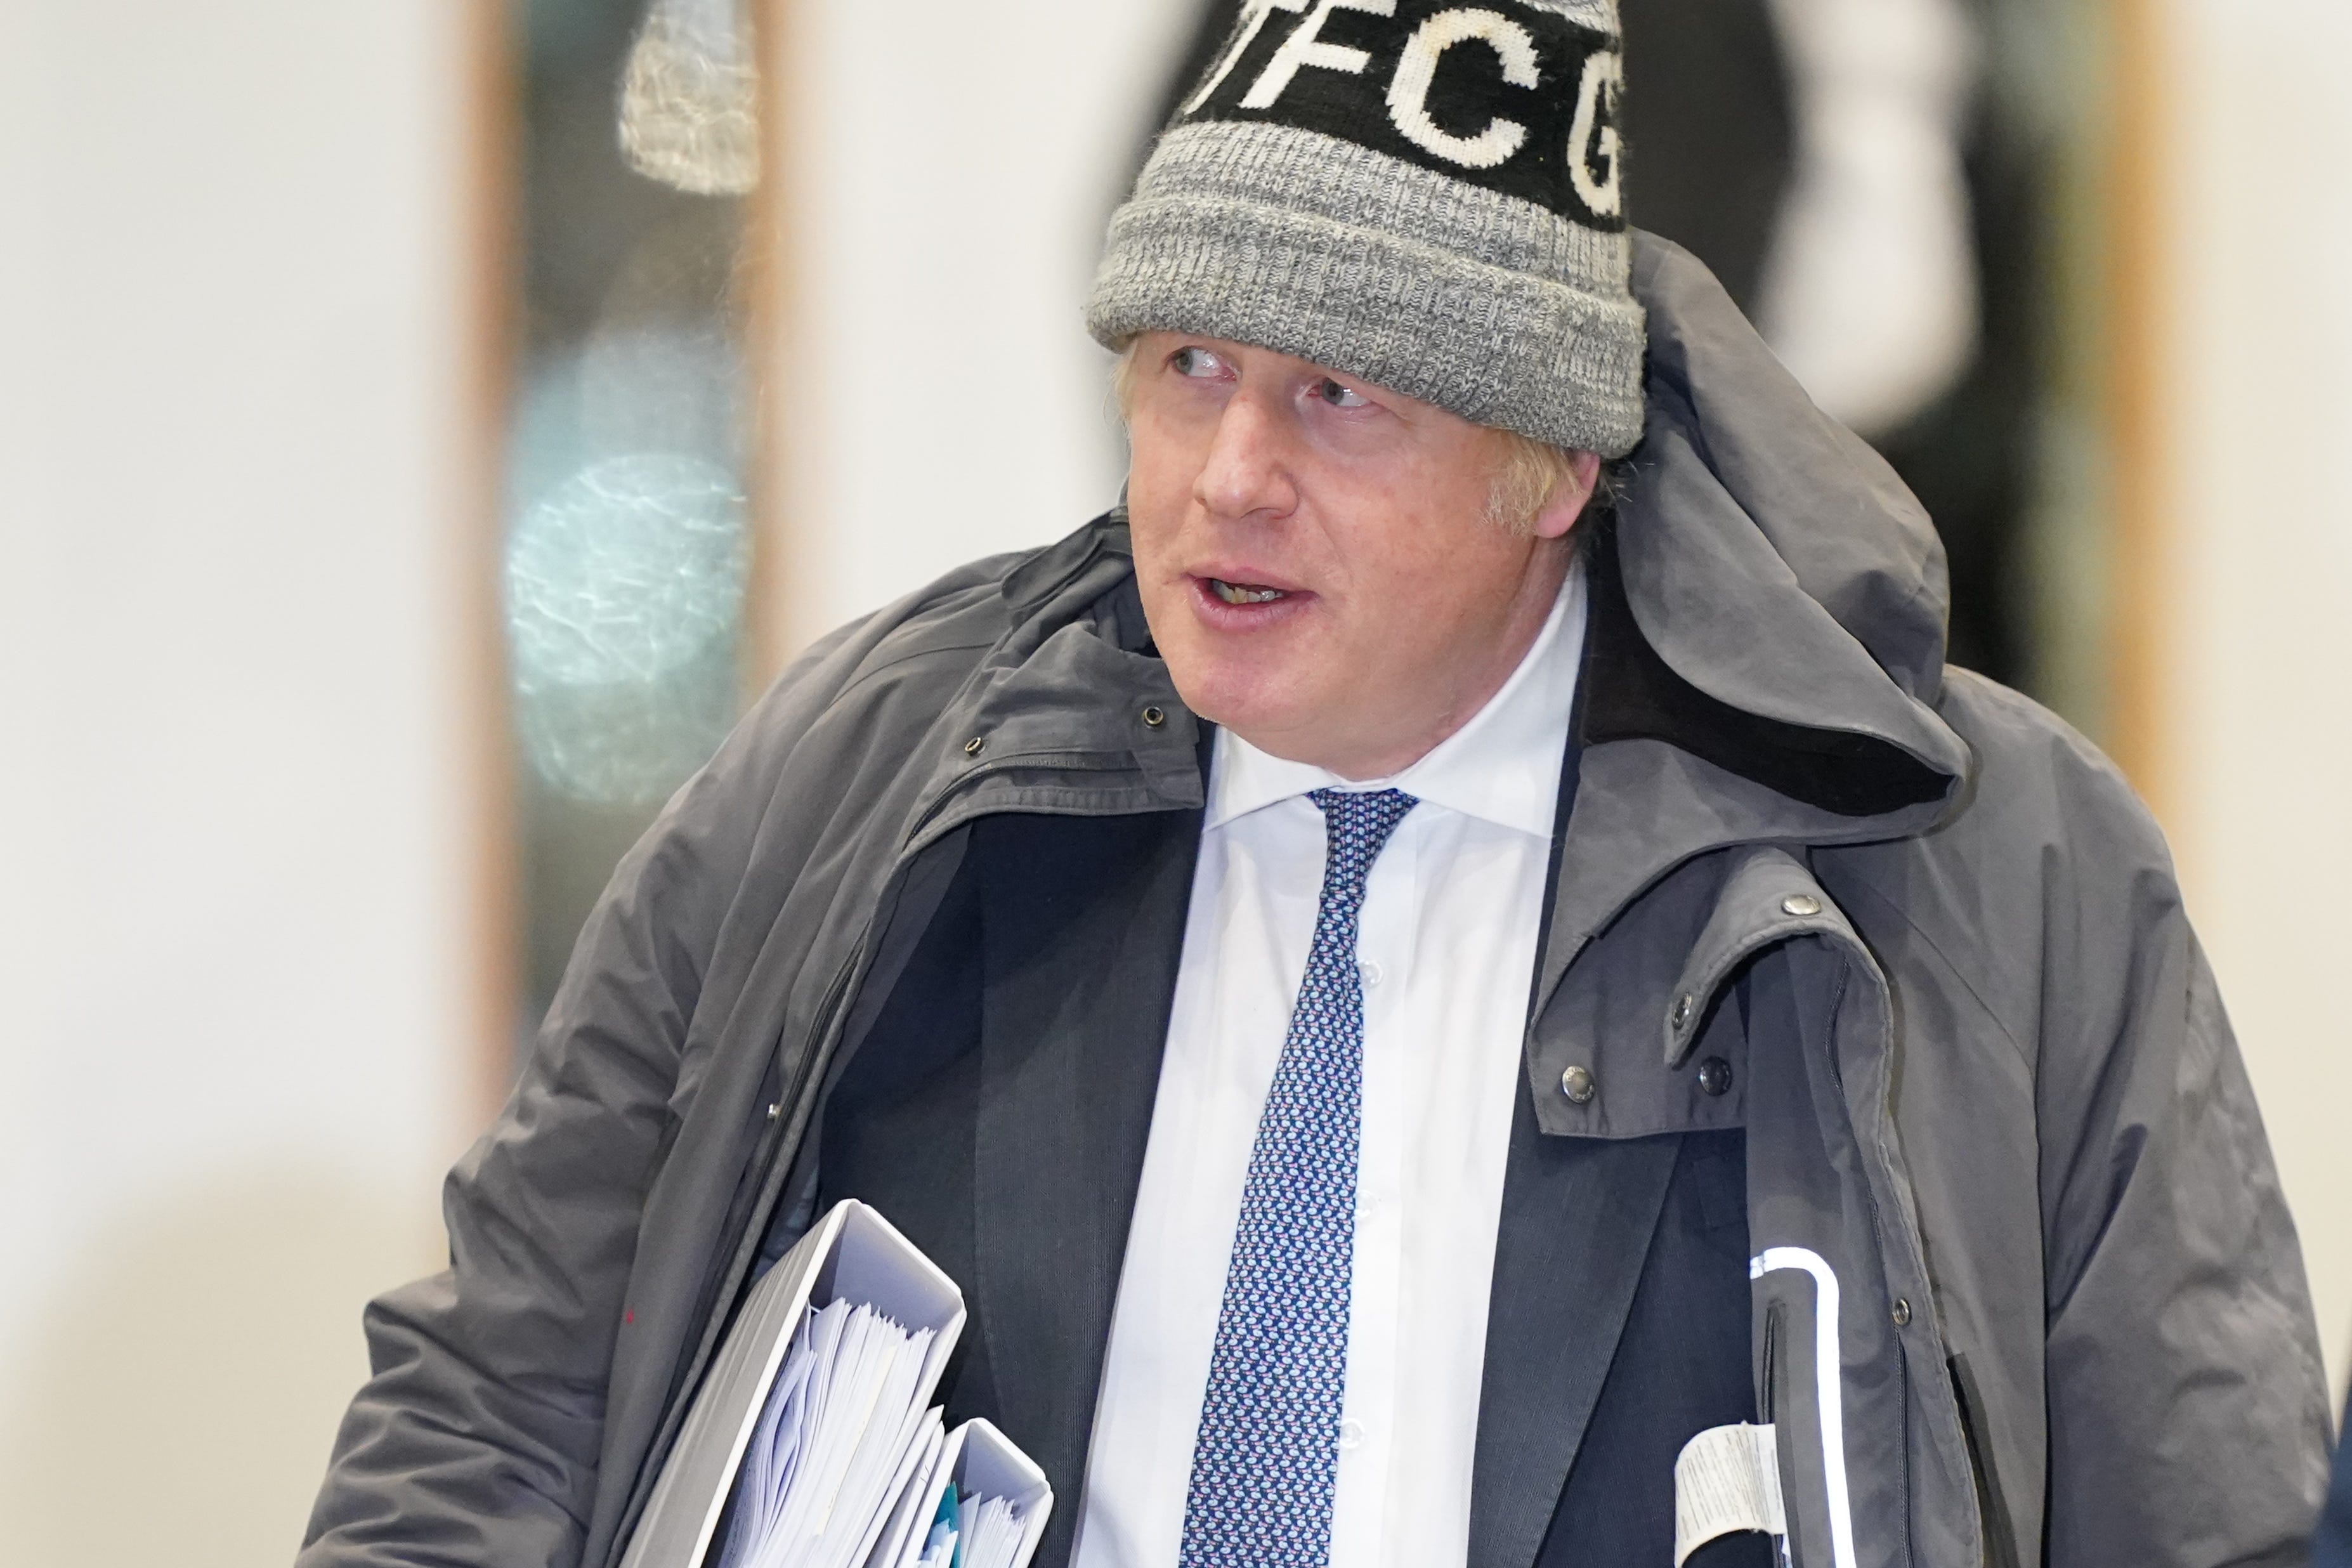 boris johnson, grimsby town, prime minister, covid, petition, petition launched to stop boris johnson wearing grimsby football hat as he’s bringing town into ‘disrepute’